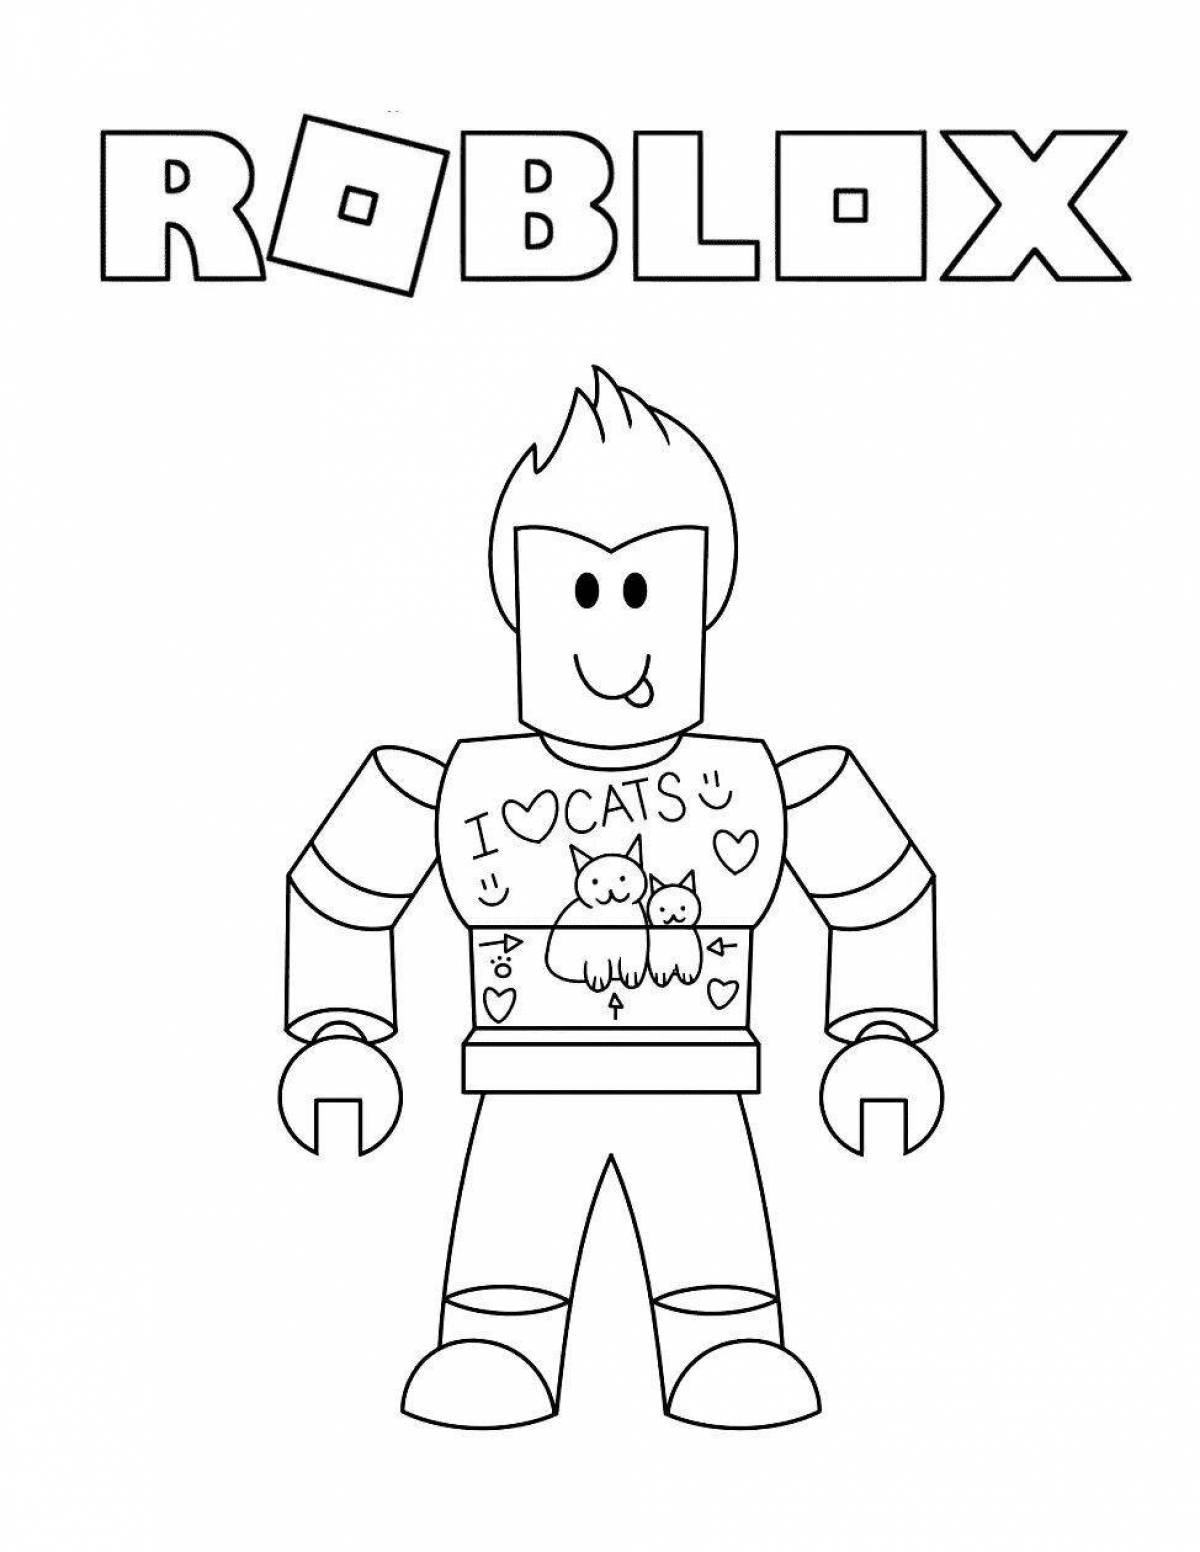 Dazzling donator roblox coloring page